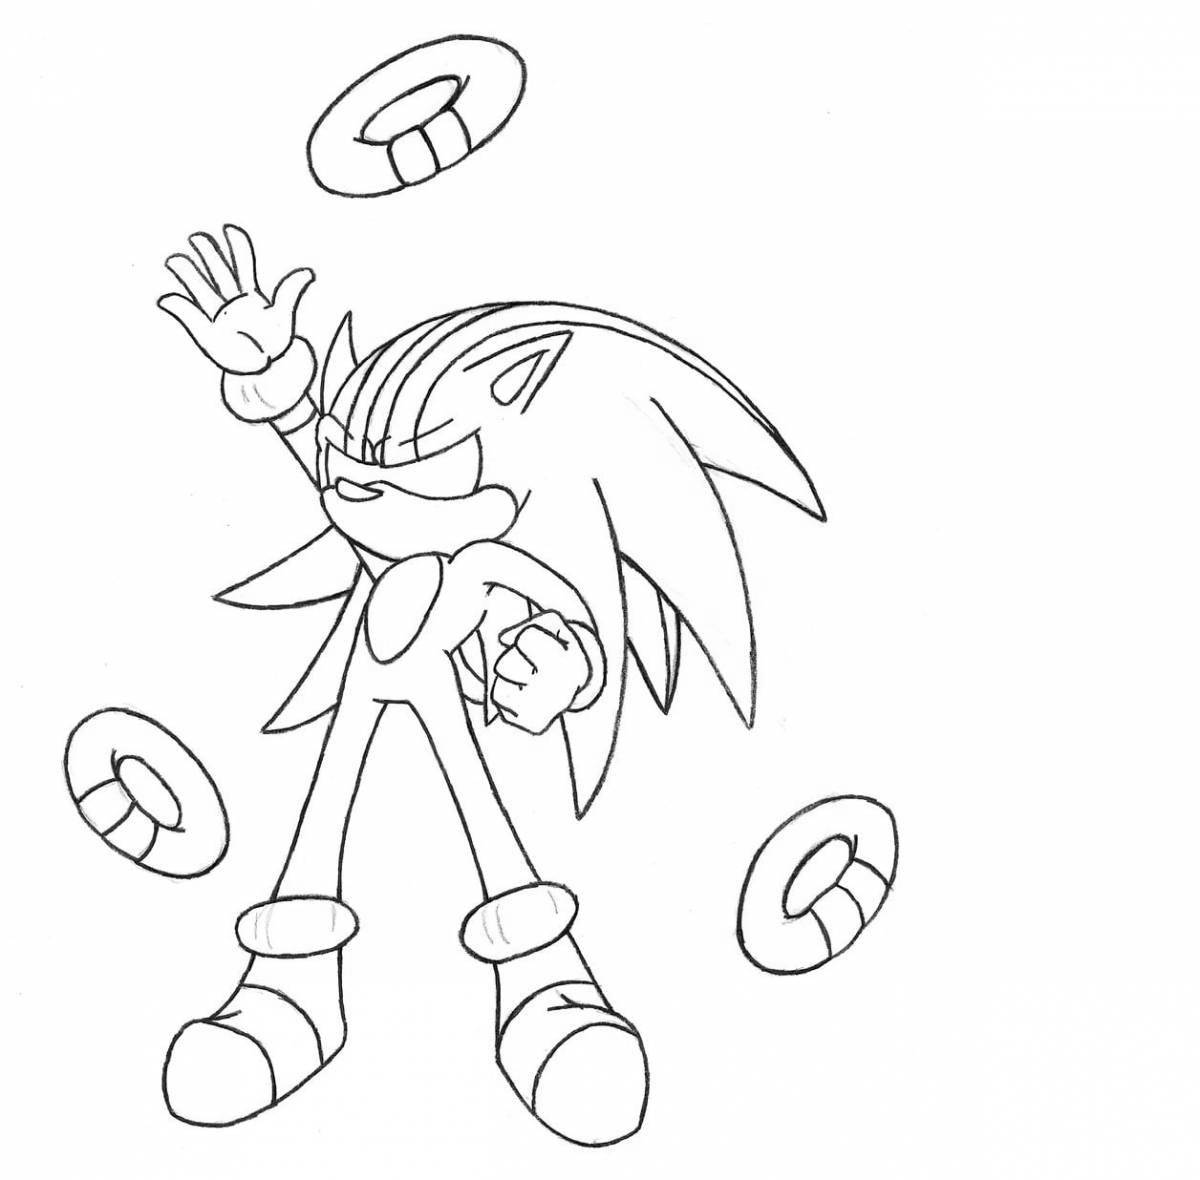 Charming sonic egze coloring book